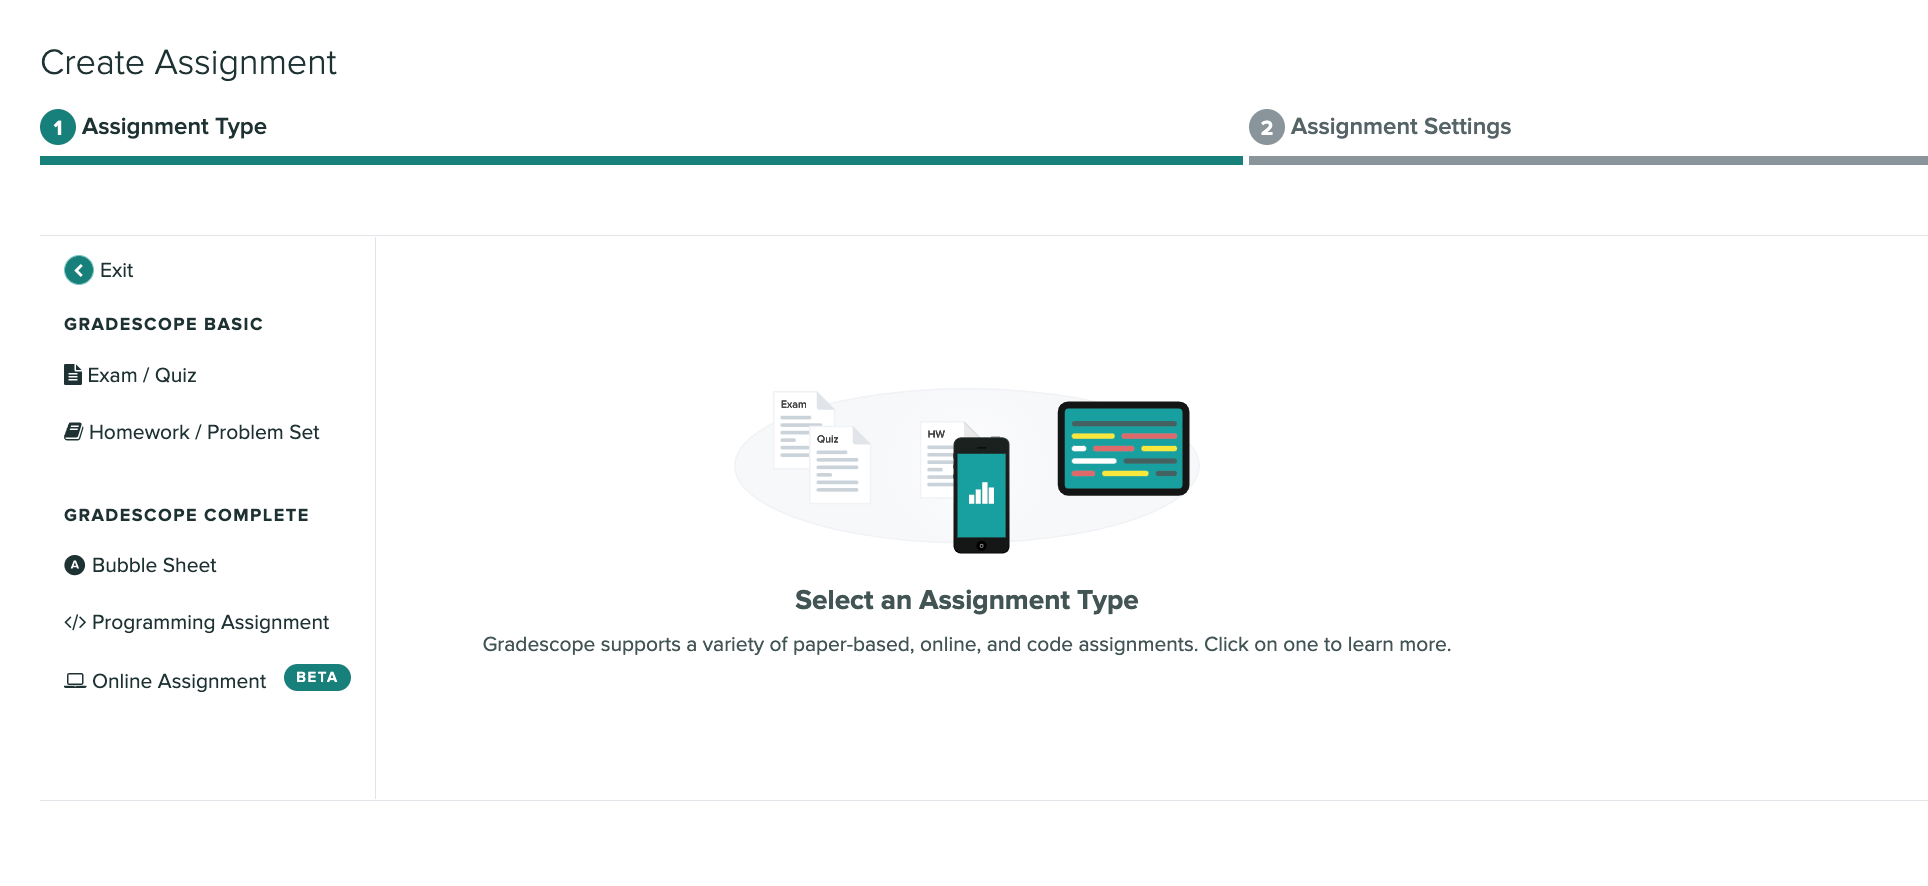 A screen capture of the Create Assignment modal that displays all the assignment types to choose and create on Gradescope.